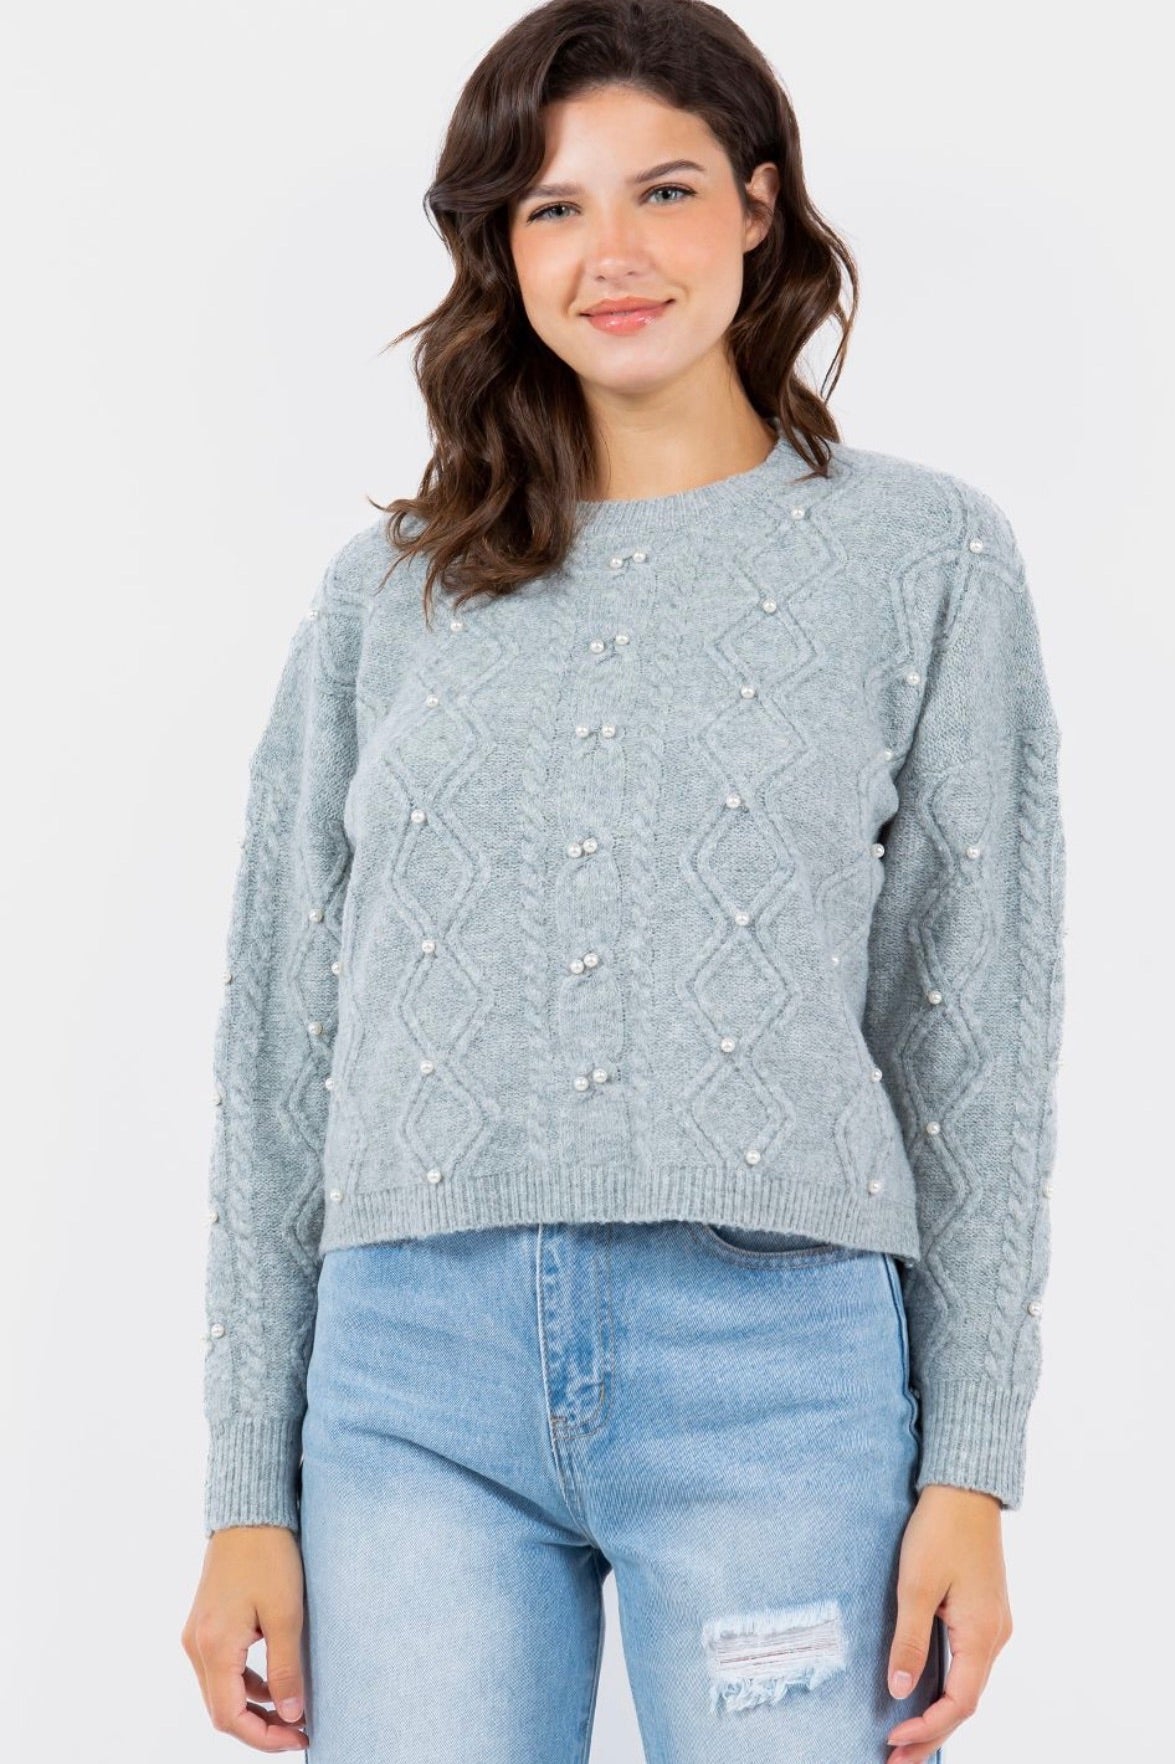 Pearl Beaded Knit Sweater